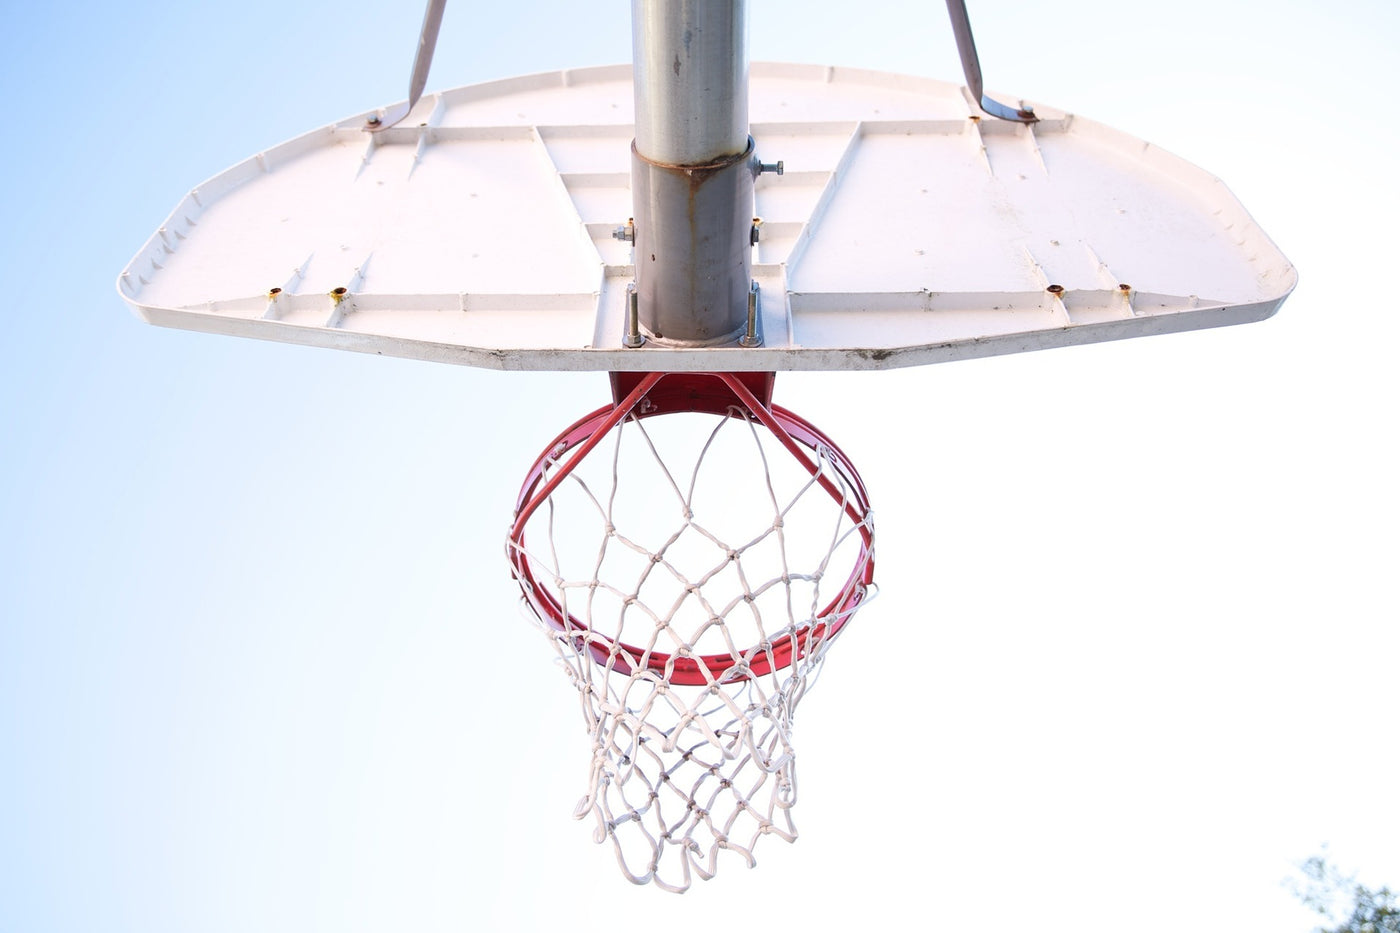 3 Factors to Consider to Buy the Right Basketball System